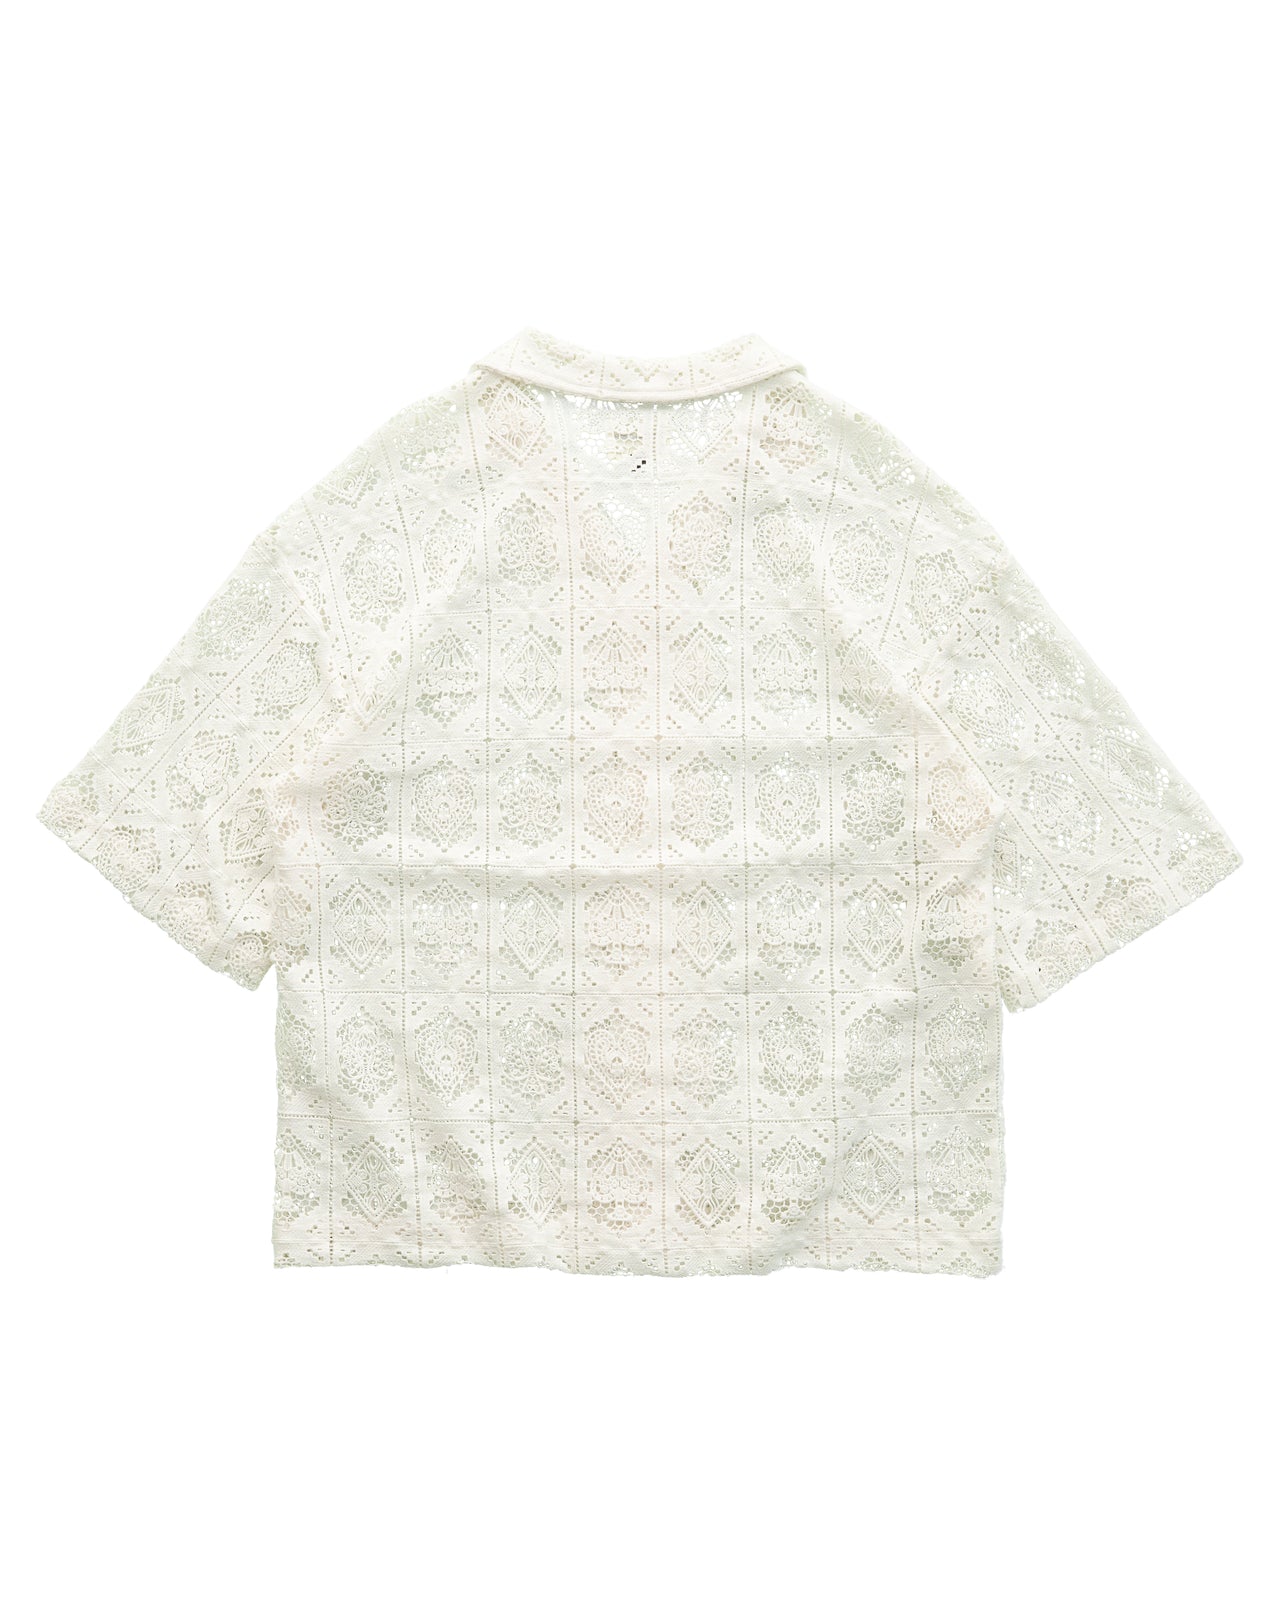 'House of Cards' White Lace Shirt